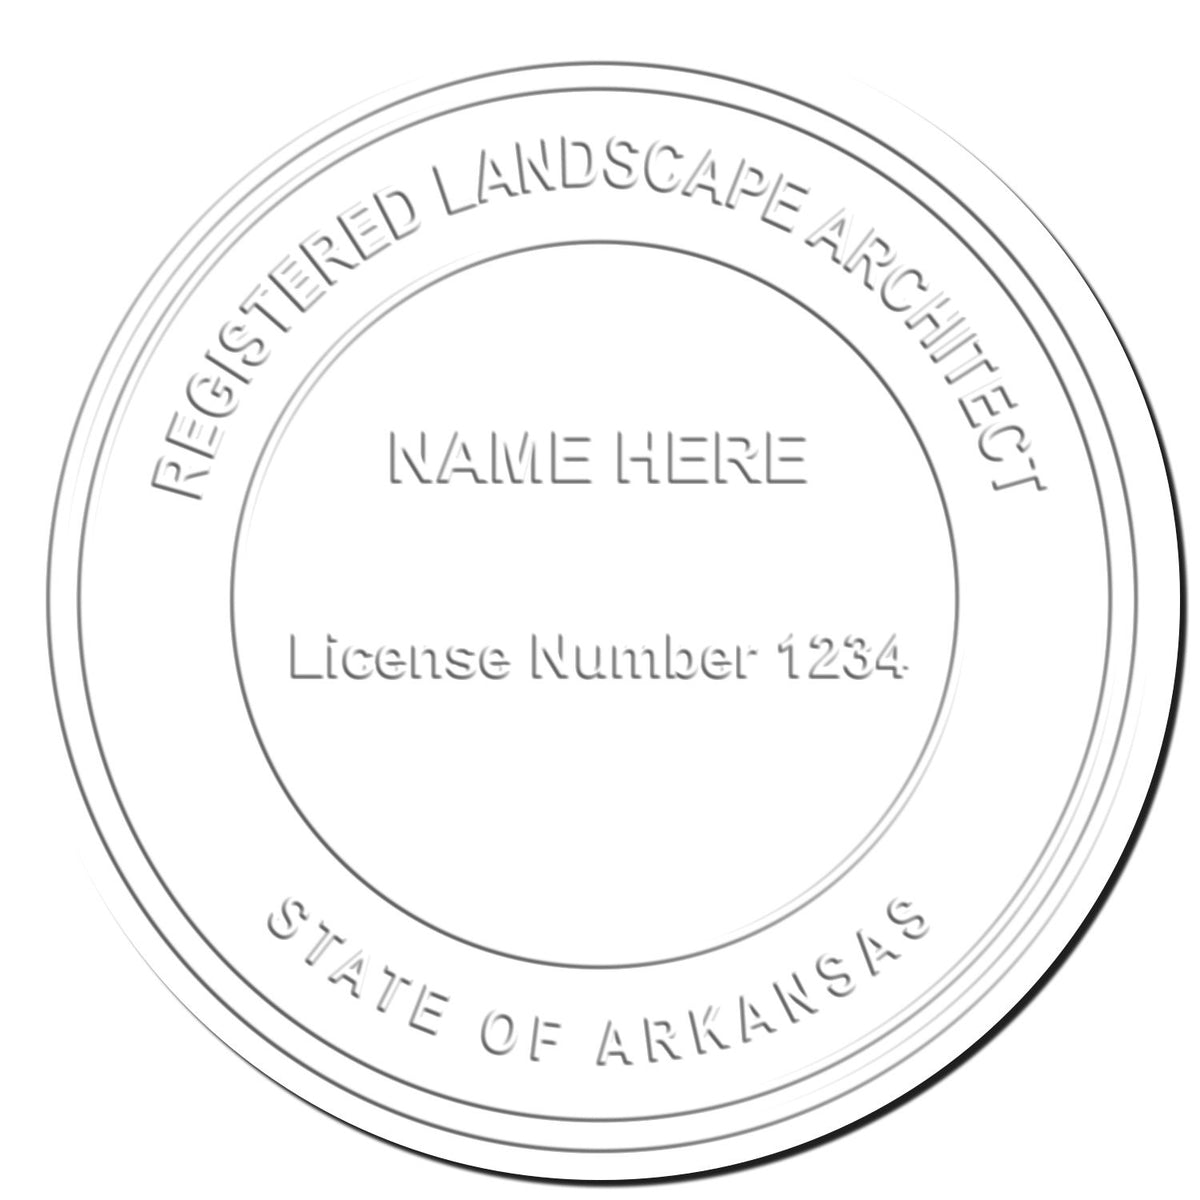 This paper is stamped with a sample imprint of the Soft Pocket Arkansas Landscape Architect Embosser, signifying its quality and reliability.